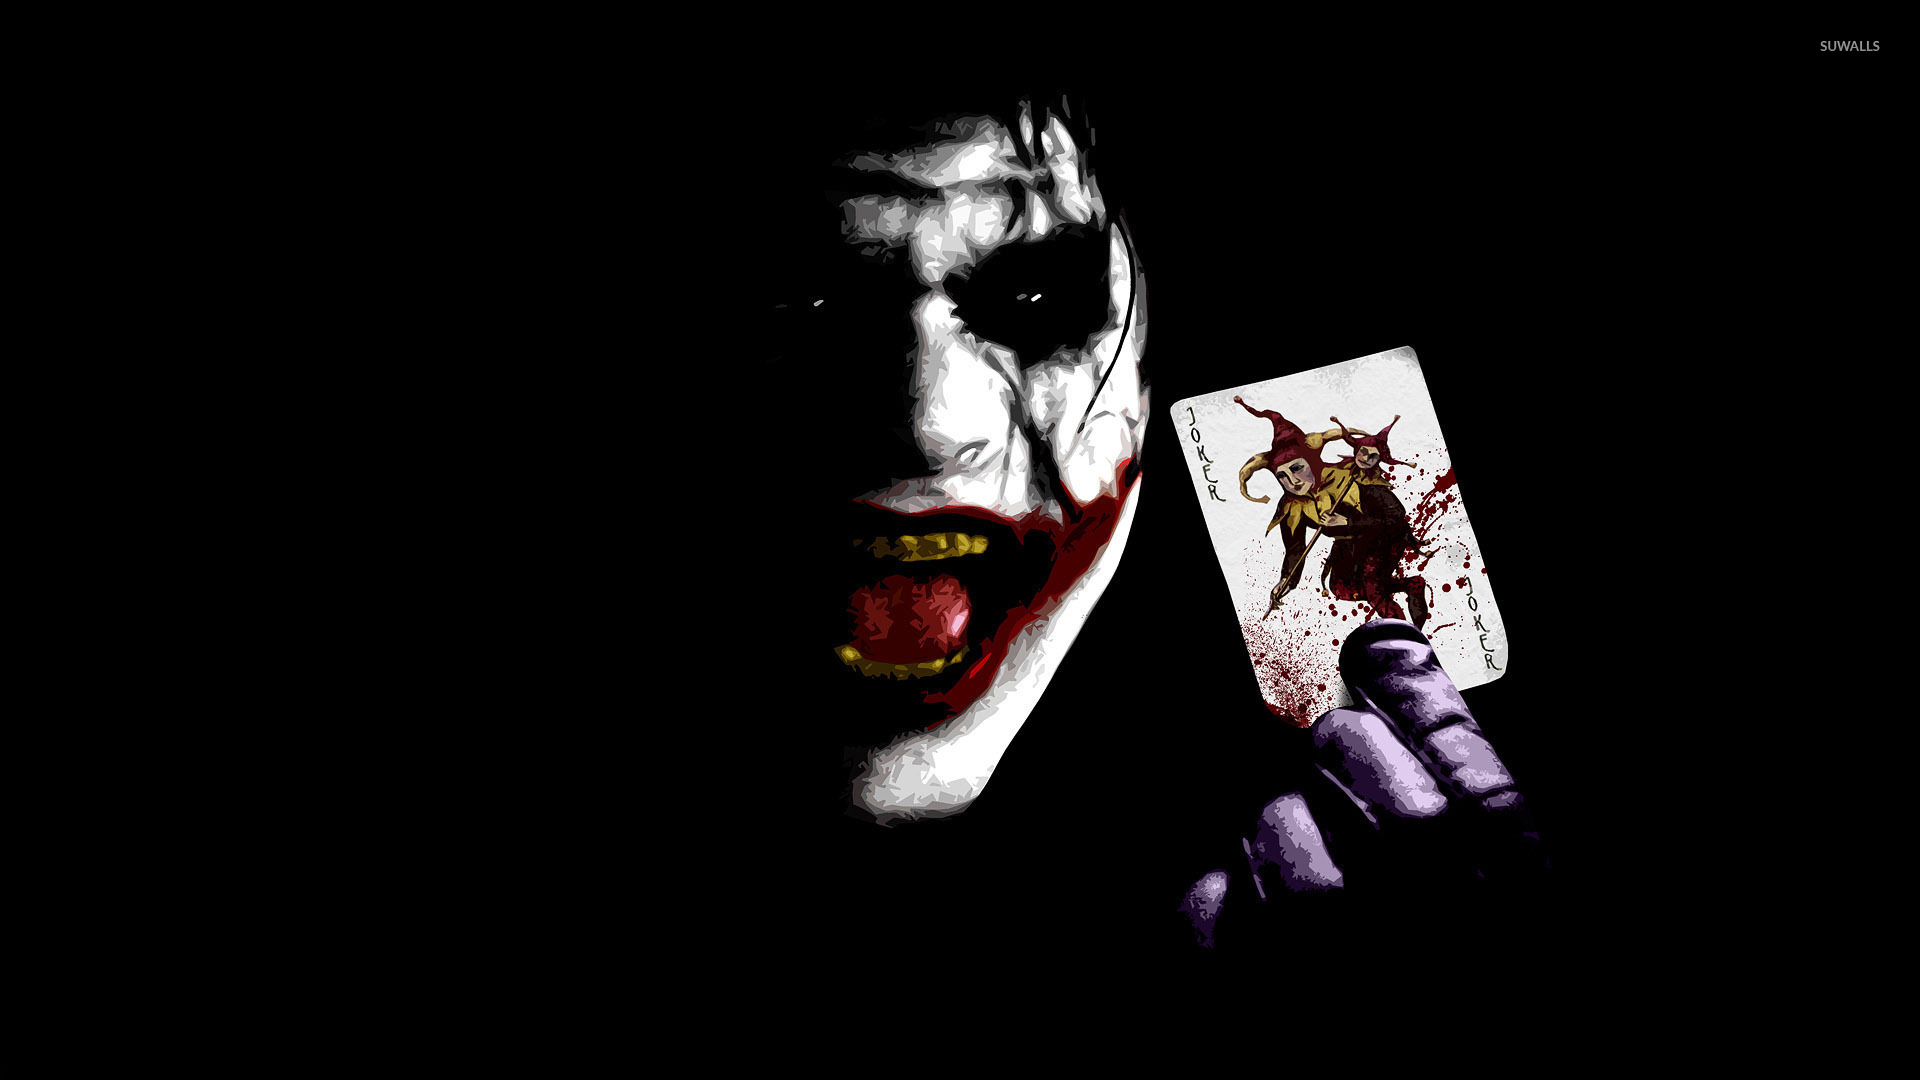 The Joker holding a card - The Dark Knight wallpaper - Movie wallpapers